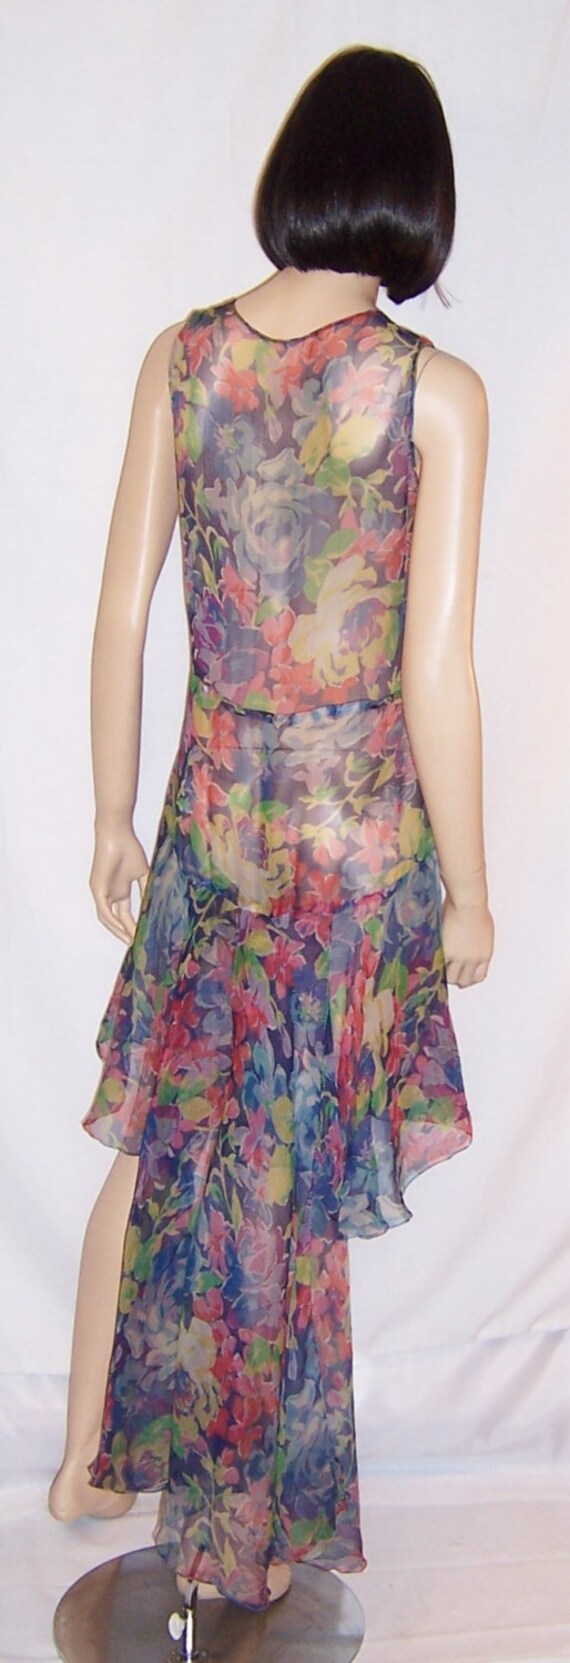 Art Deco Blue Floral Printed Chiffon Fishtail Gown - image 2